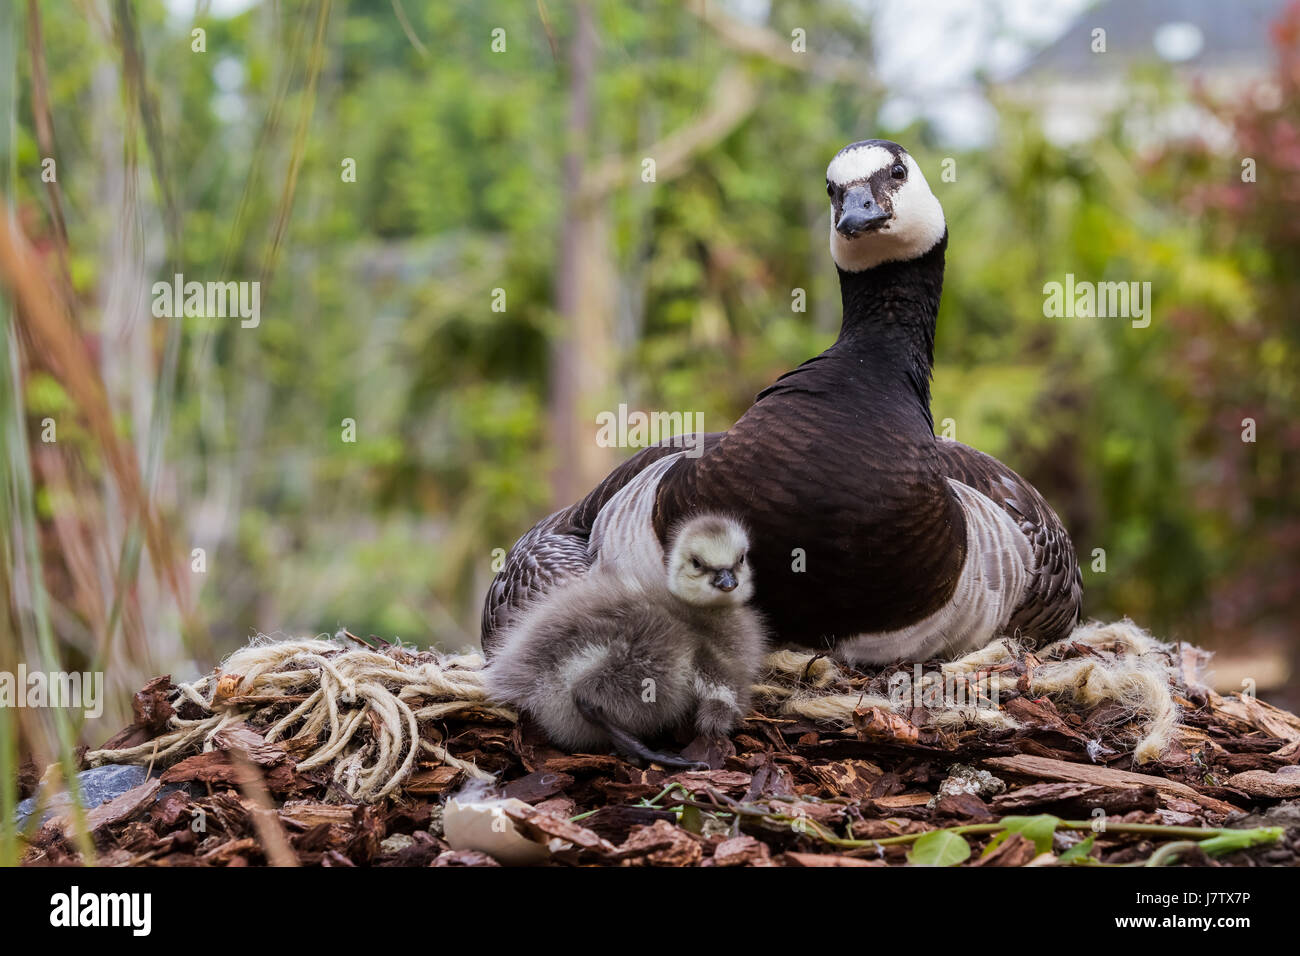 Mother goose with her young under her wing Stock Photo